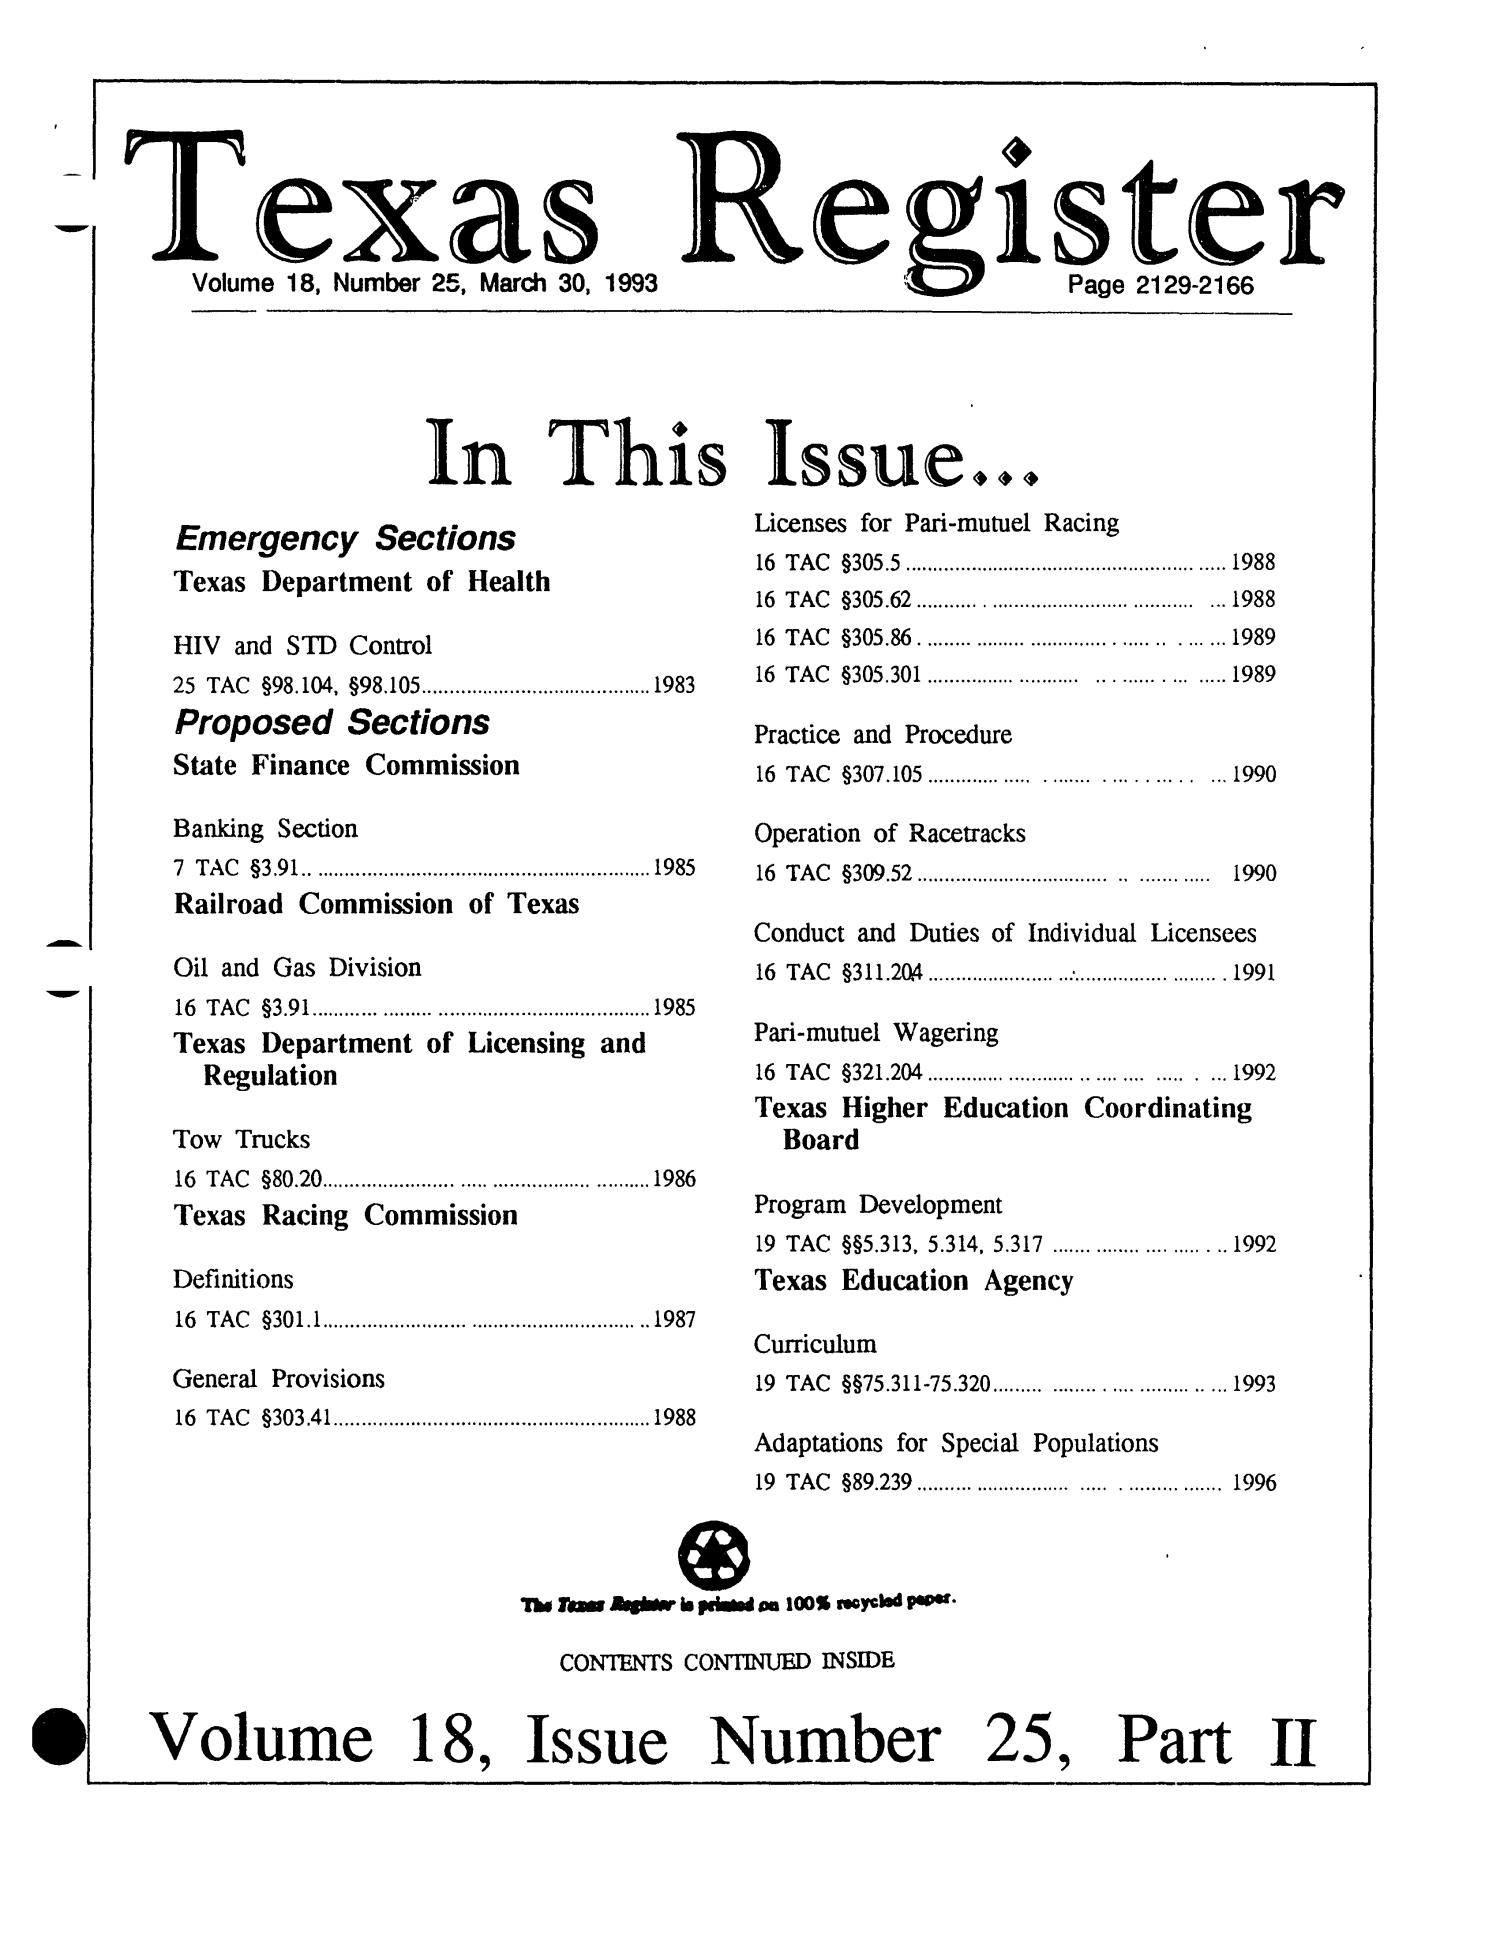 Texas Register, Volume 18, Number 25, Part II, Pages 2129-2166, March 30, 1993
                                                
                                                    Title Page
                                                